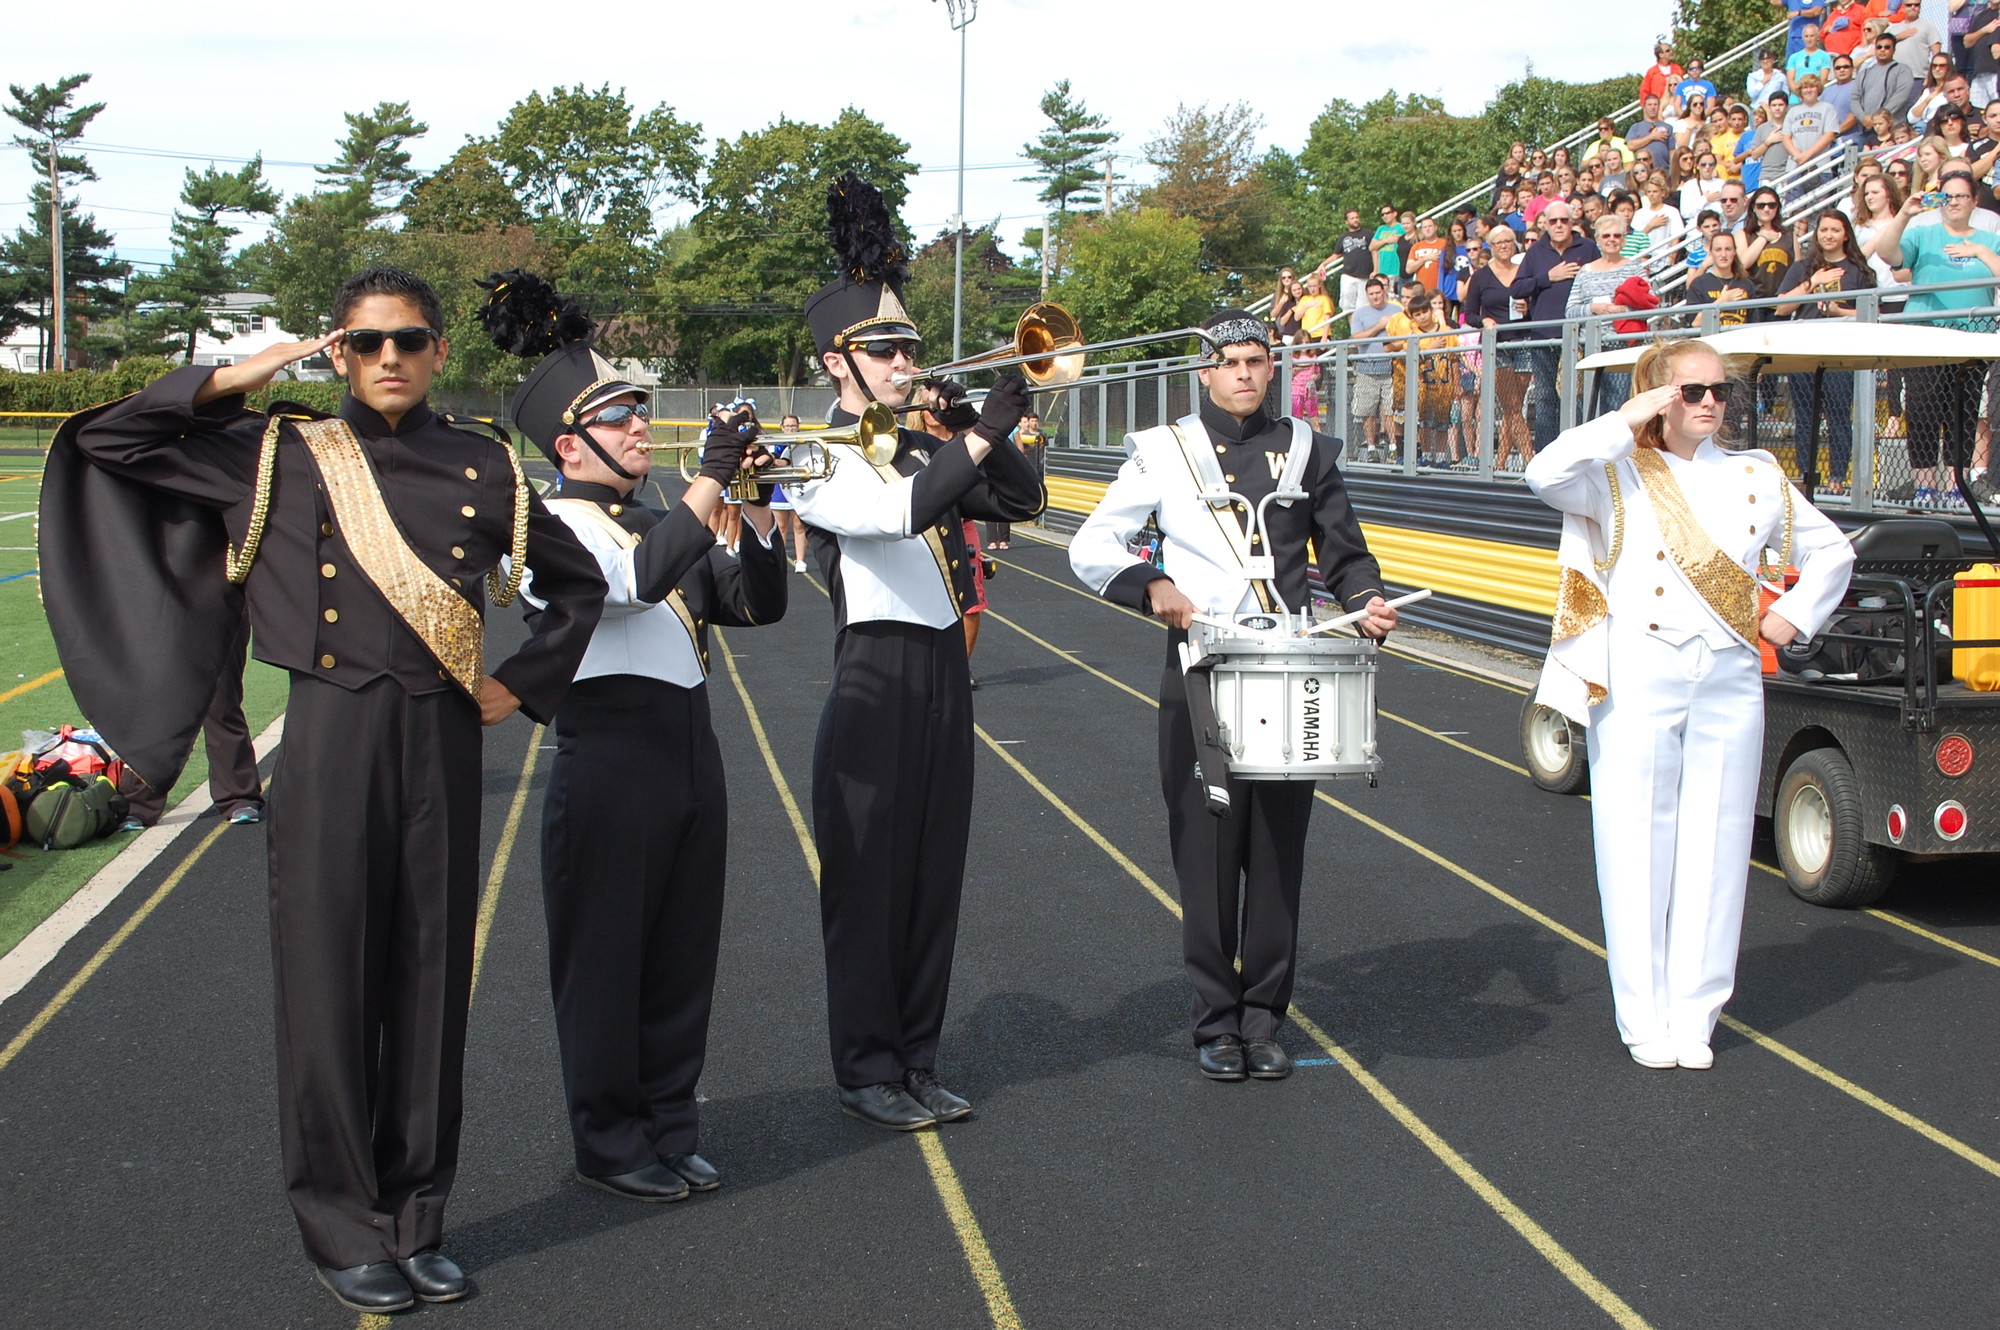 The marching band played the national anthem.